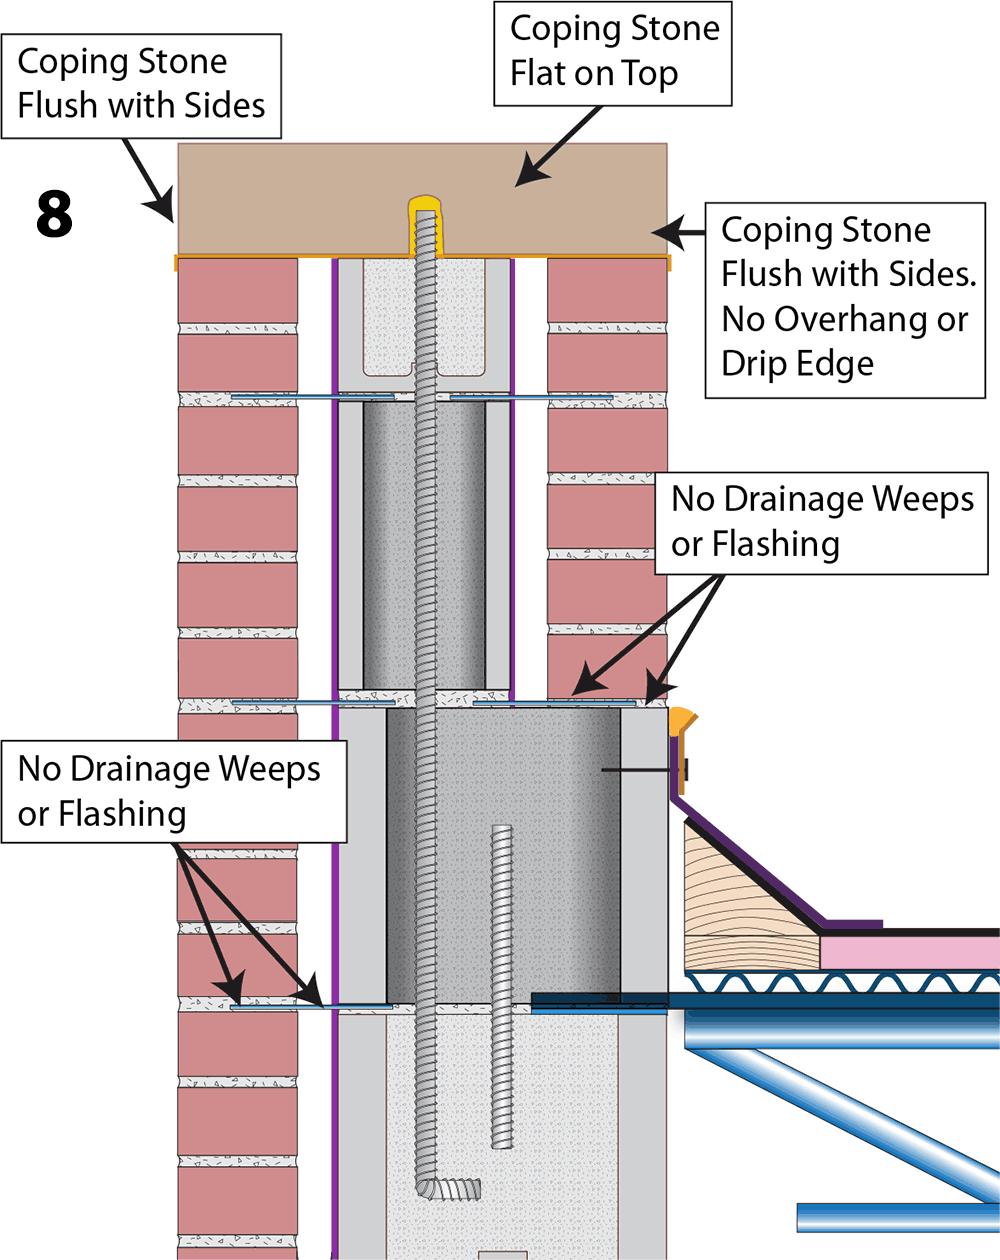 Identify and Isolate Parapet Detail Identify and isolate the parapet wall detail from the exterior wall detail that encloses the interior spaces and identify and isolate the parapet wall from the